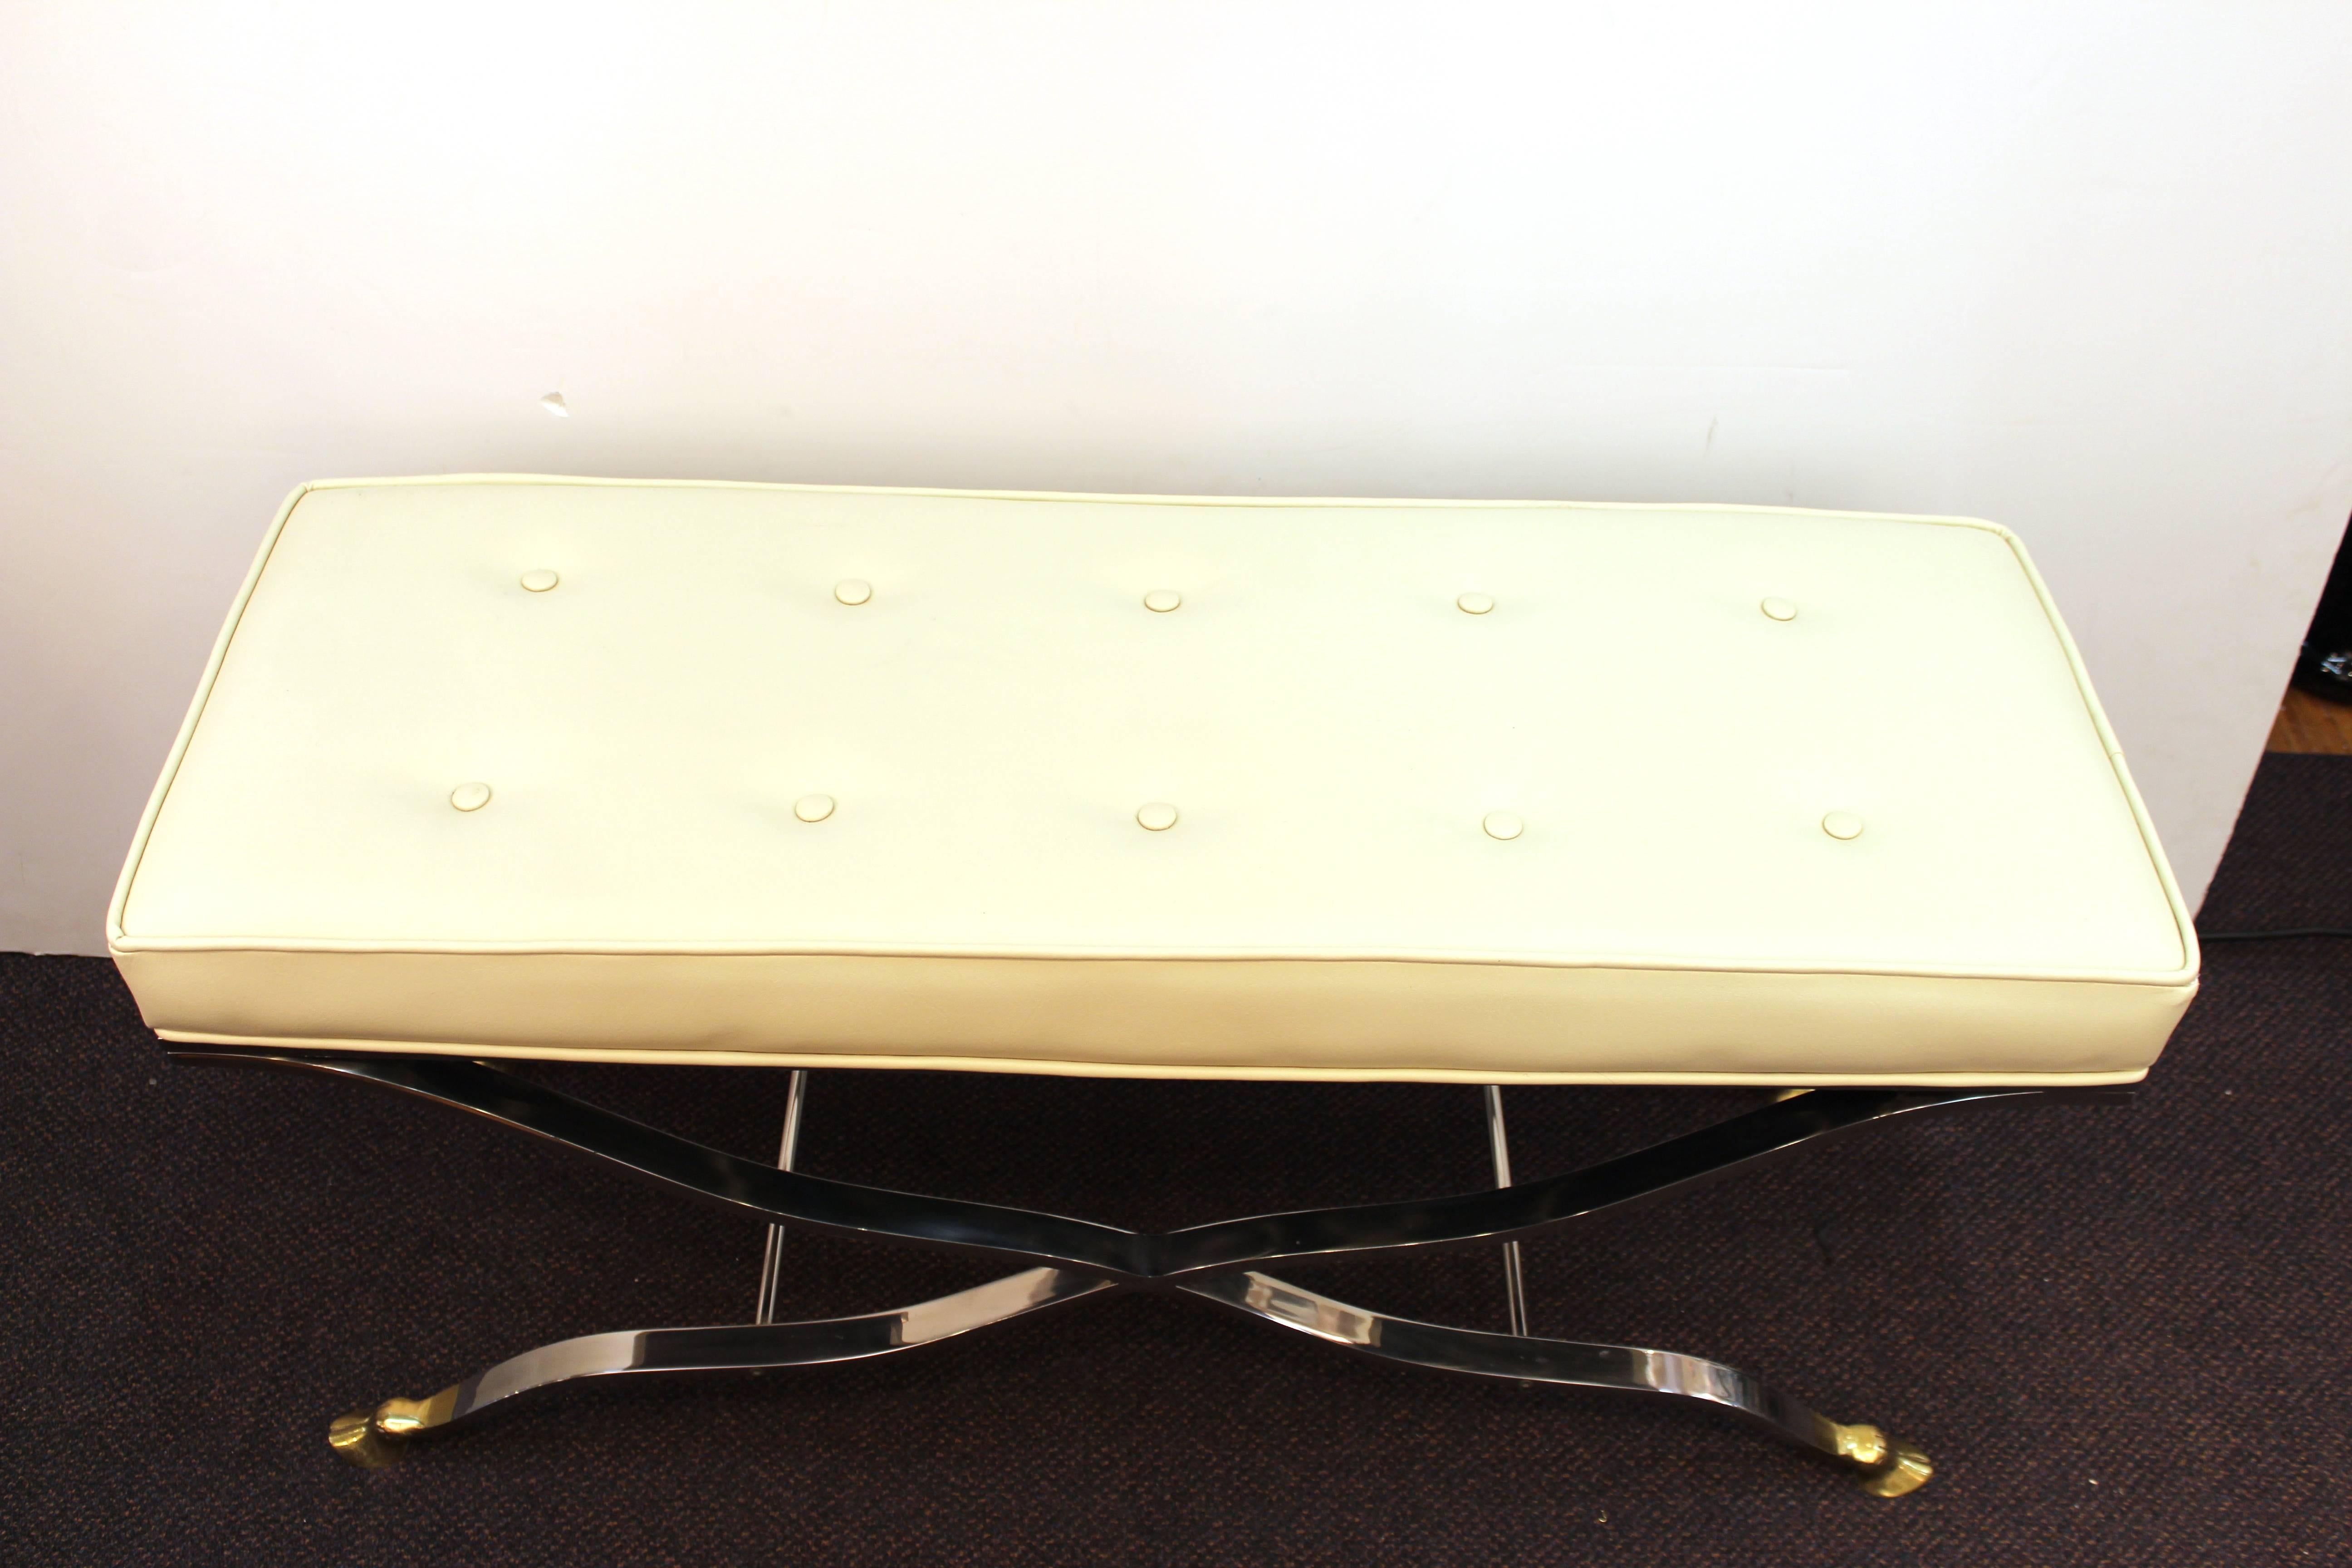 Hollywood regency style bench with cloven feet. Crafted in polished chrome with brass feet. Upholstered in off-white. Wear appropriate to age and use. the bench is in good condition. 